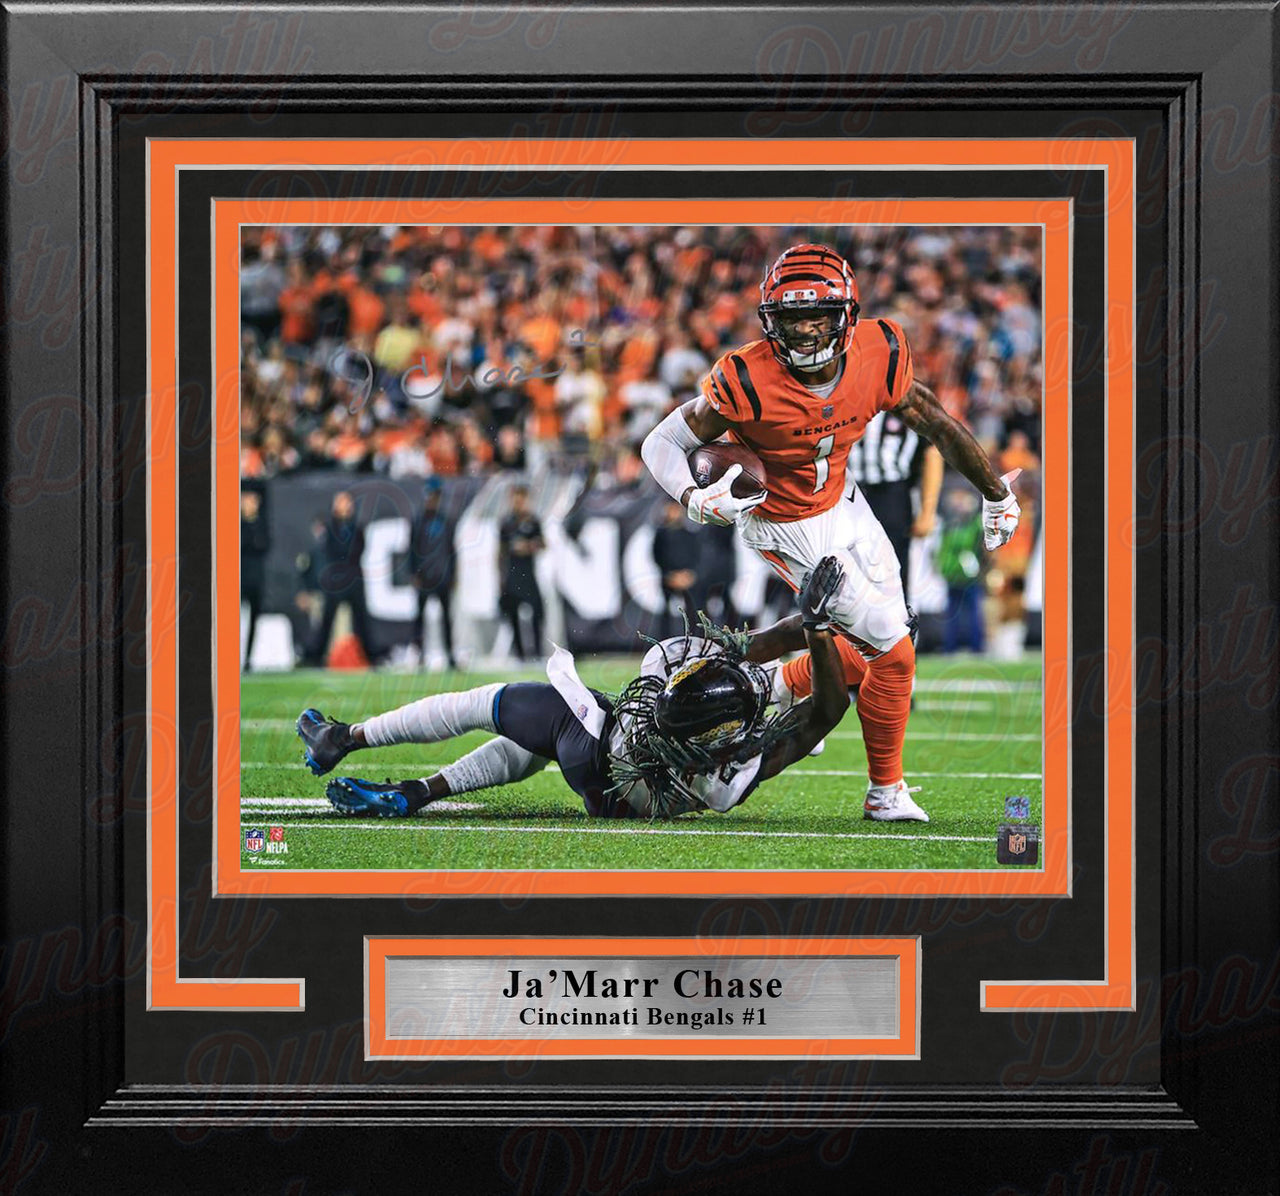 Ja'Marr Chase in Action Cincinnati Bengals Autographed Framed Football Photo - Dynasty Sports & Framing 